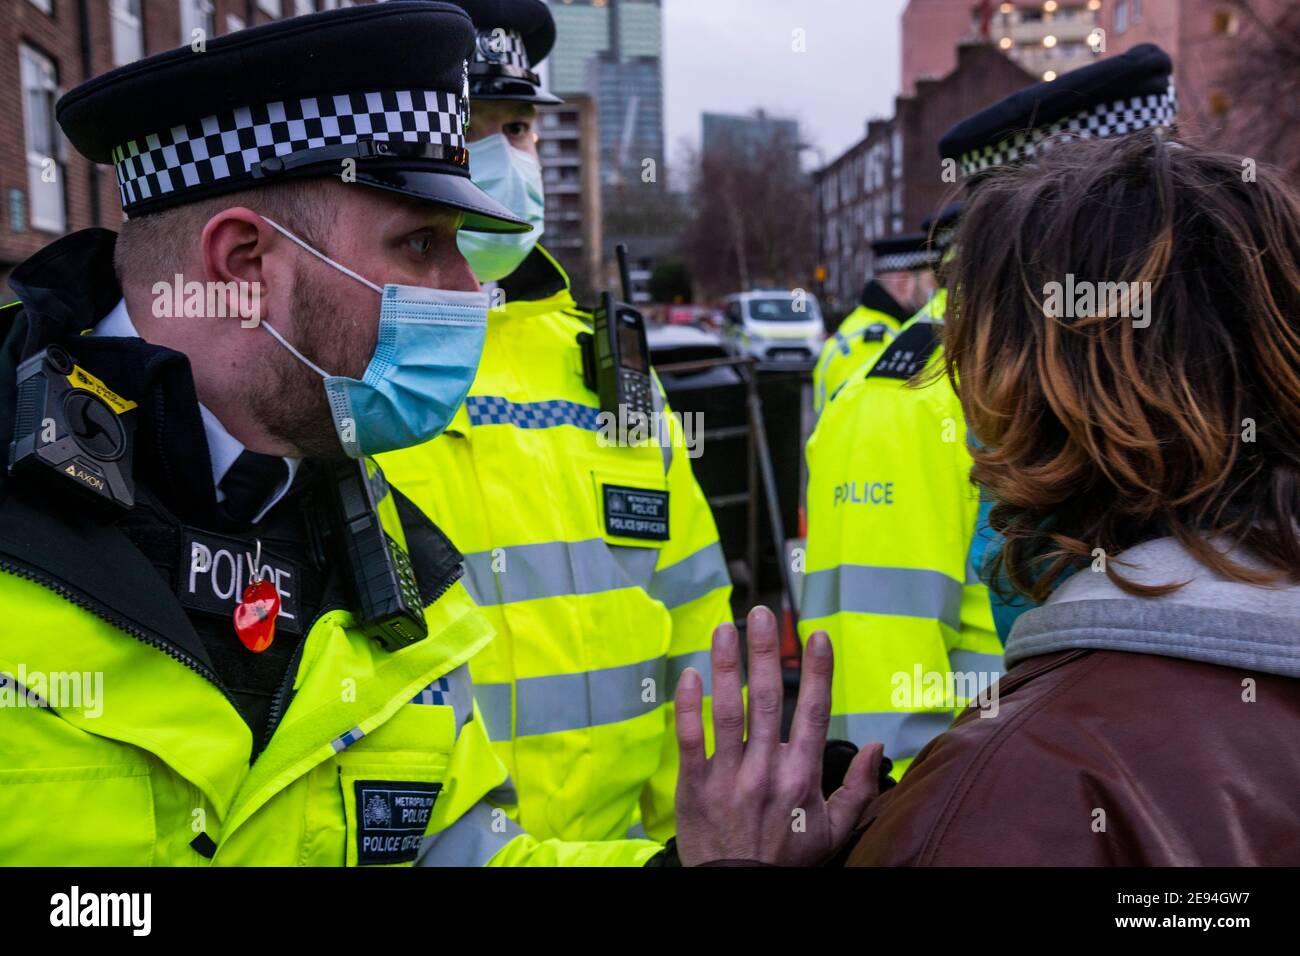 London, UK. 2 Feb 2021. Eventually HS2 security start to bring protesters out and they are arrested by the police which leads to some scuffling - Supporters from Extinction Rebellion stage a protest at a construction site near Camden which brings work to an end on HS2, at least temporarily - they have a banner which says Essential Work Should Heal Not Harm. The anti HS2 Extinction Rebellion camp continues to be cleared (in order to create a temporary parking area) by Bailiffs (from the National Enforcement Team, NET, a subsidiary of High Court Enforcement Group) at Euston Station. Credit: Guy Stock Photo